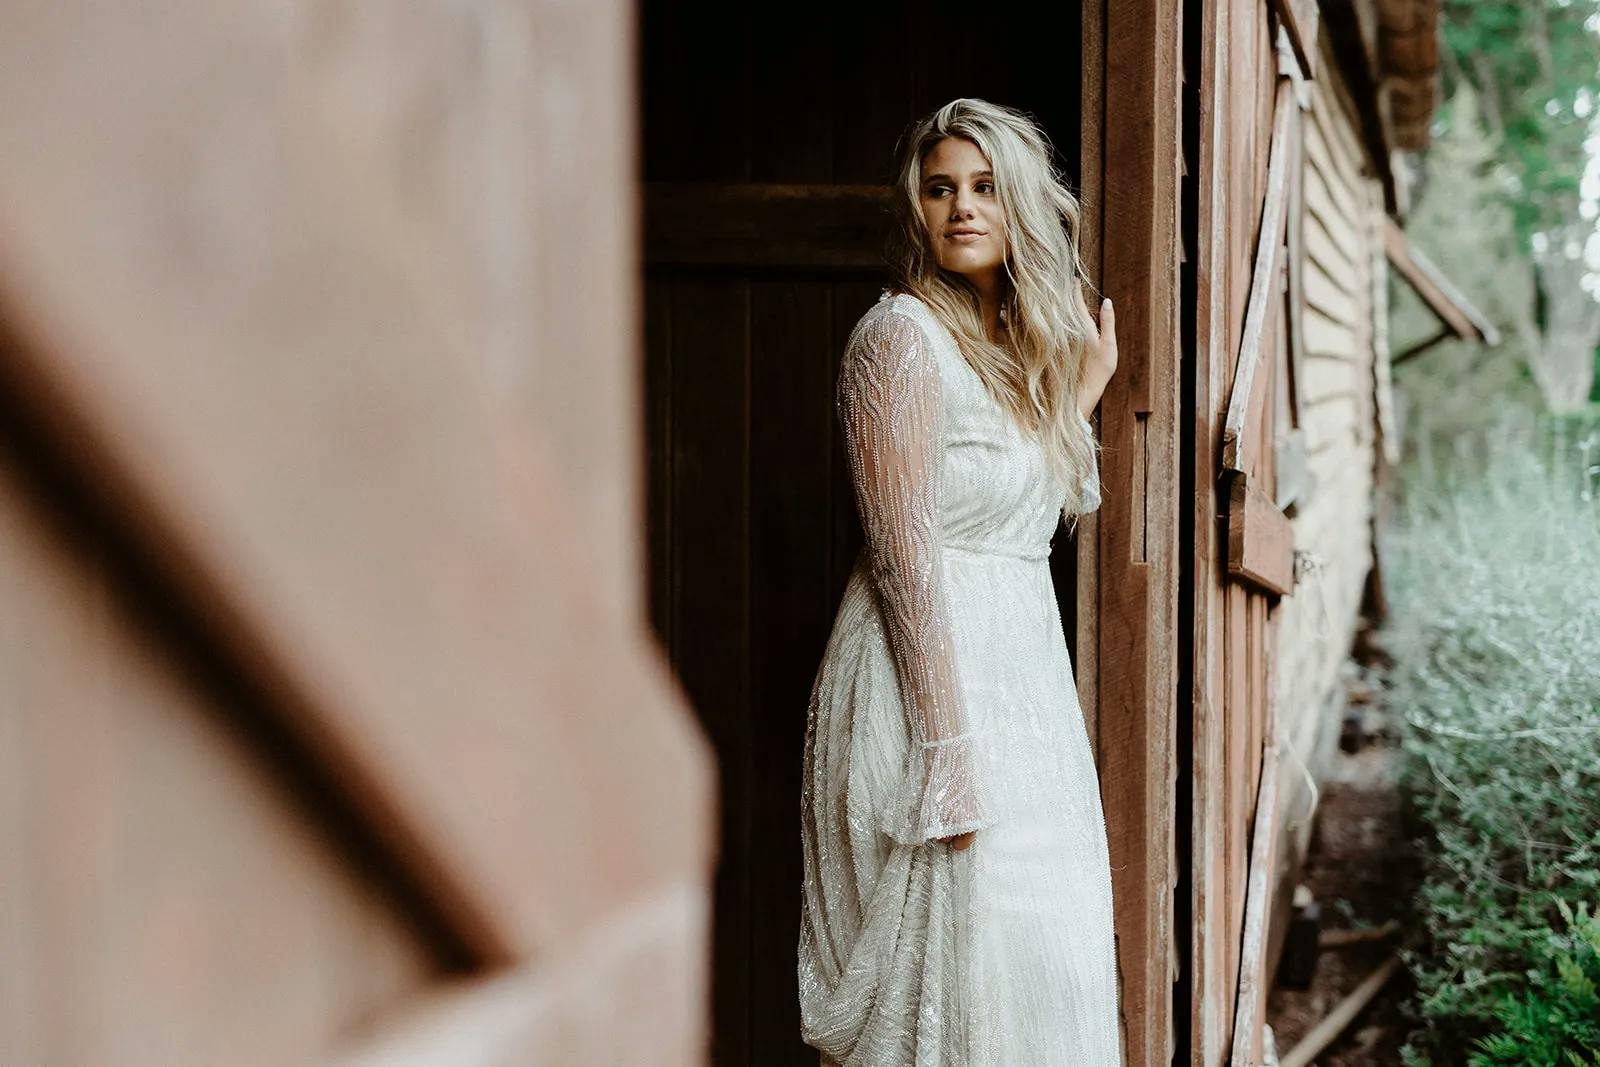 A woman in a white, long-sleeve dress with textured fabric stands in a partially open doorway of a rustic wooden building, looking off into the distance with a relaxed, thoughtful expression. She has long, wavy blonde hair and there is greenery in the background.